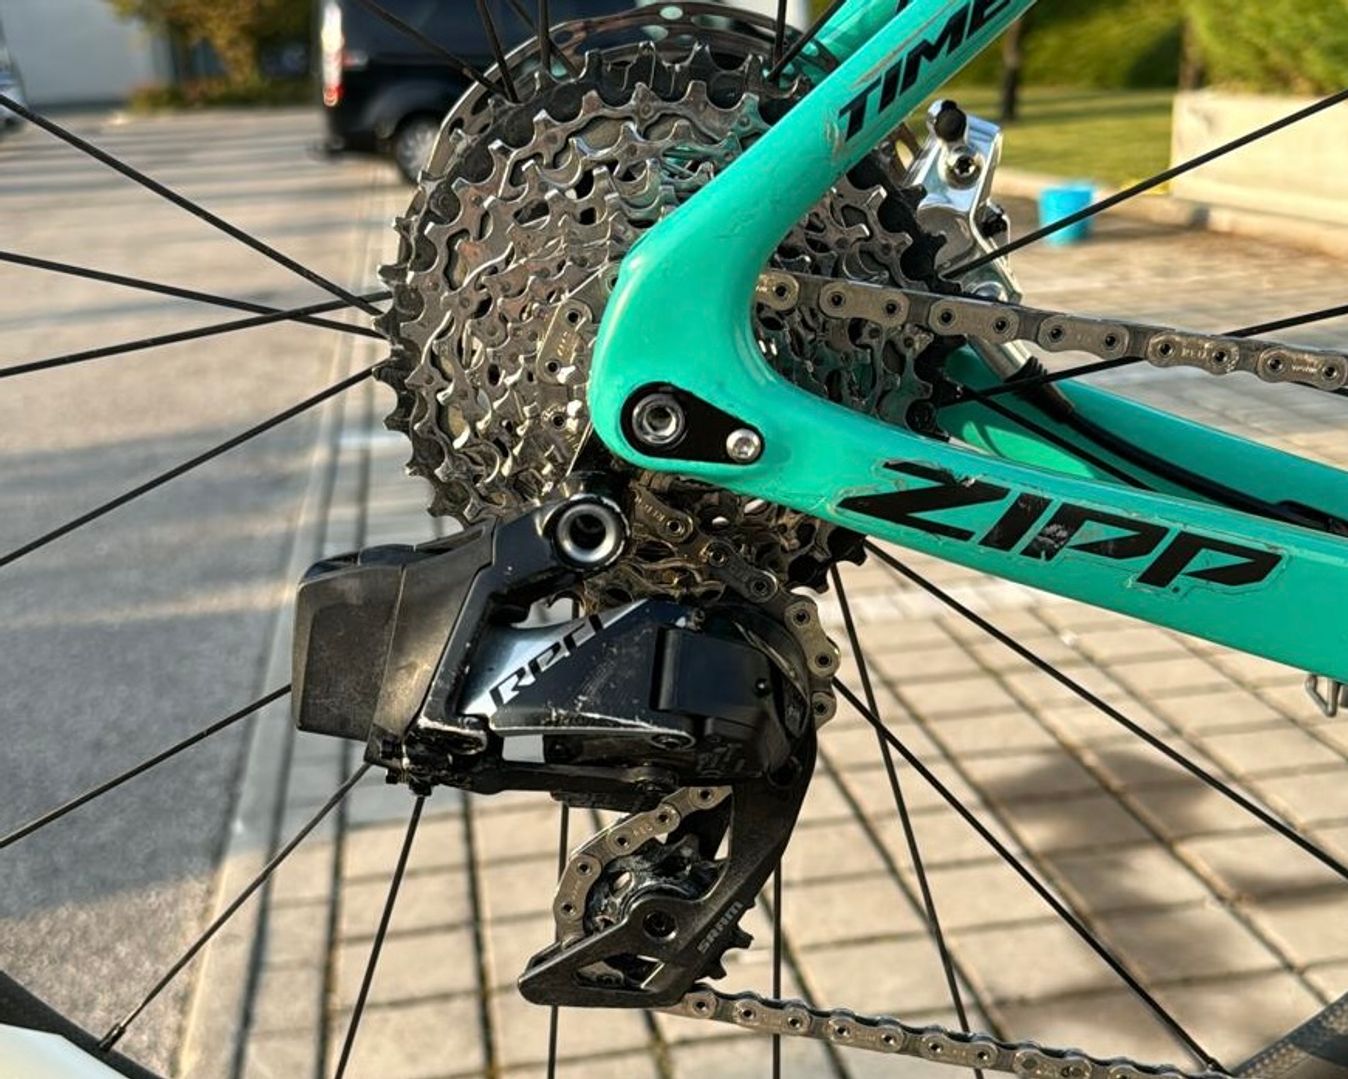 Roche opted for a close ratio road cassette and derailleur 